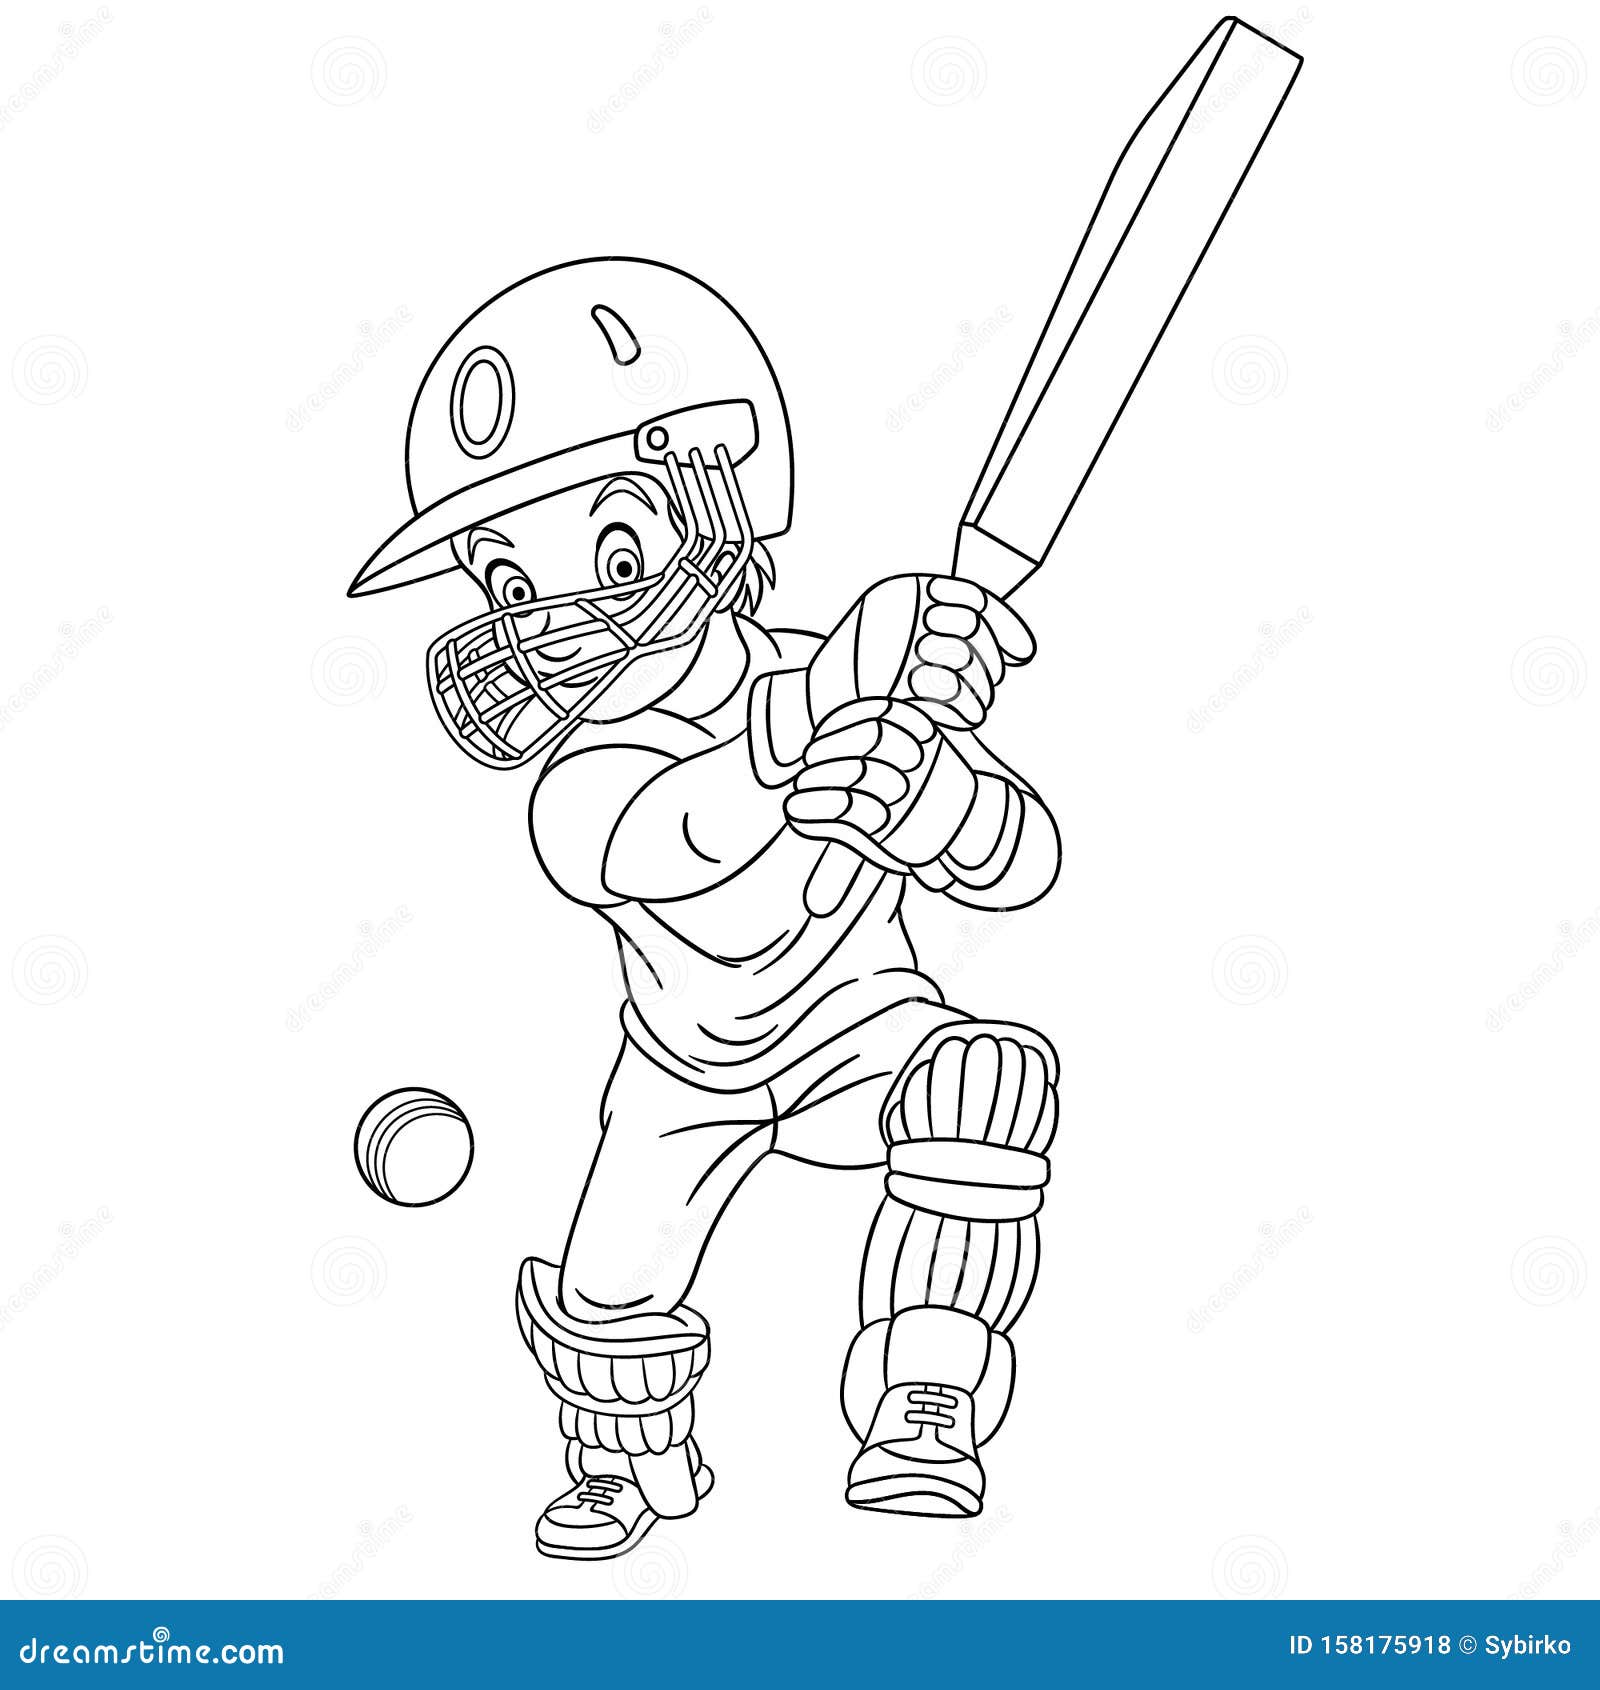 How to draw a Cricket Player Easy  YouTube